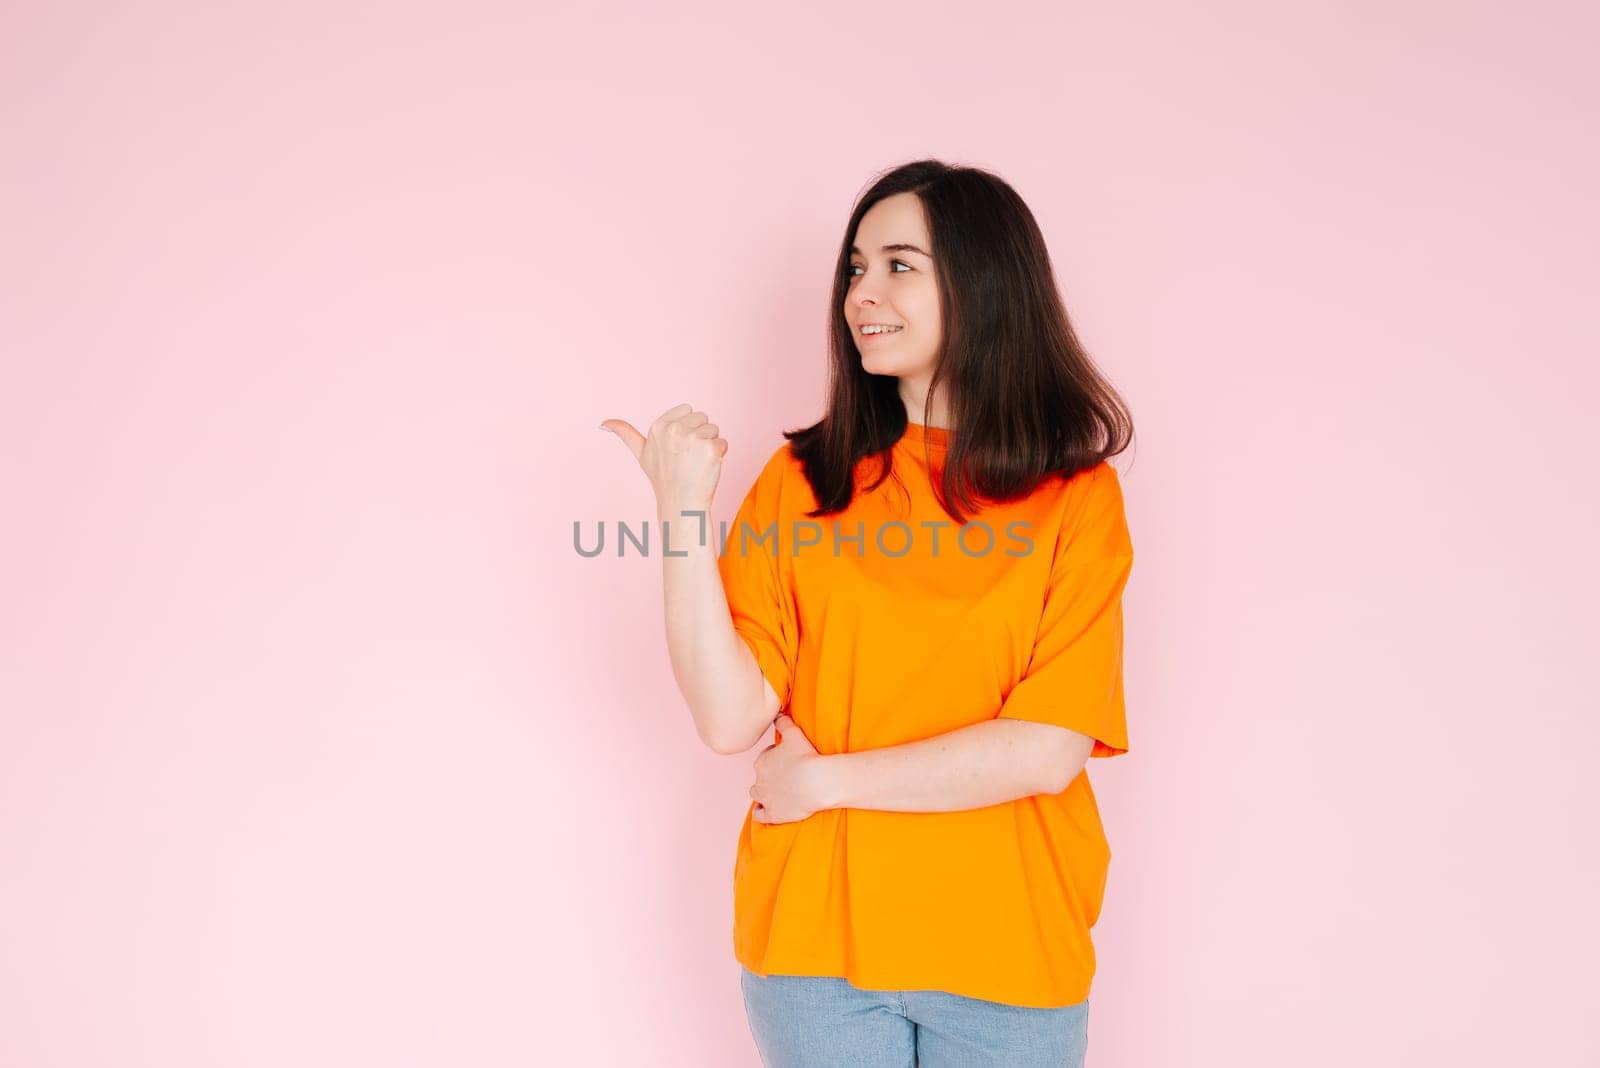 Alluring Advertising Space: Charming Lady Pointing Thumbs at Empty Area - Attention-Grabbing Concept for Promotional Opportunities on Pink Background